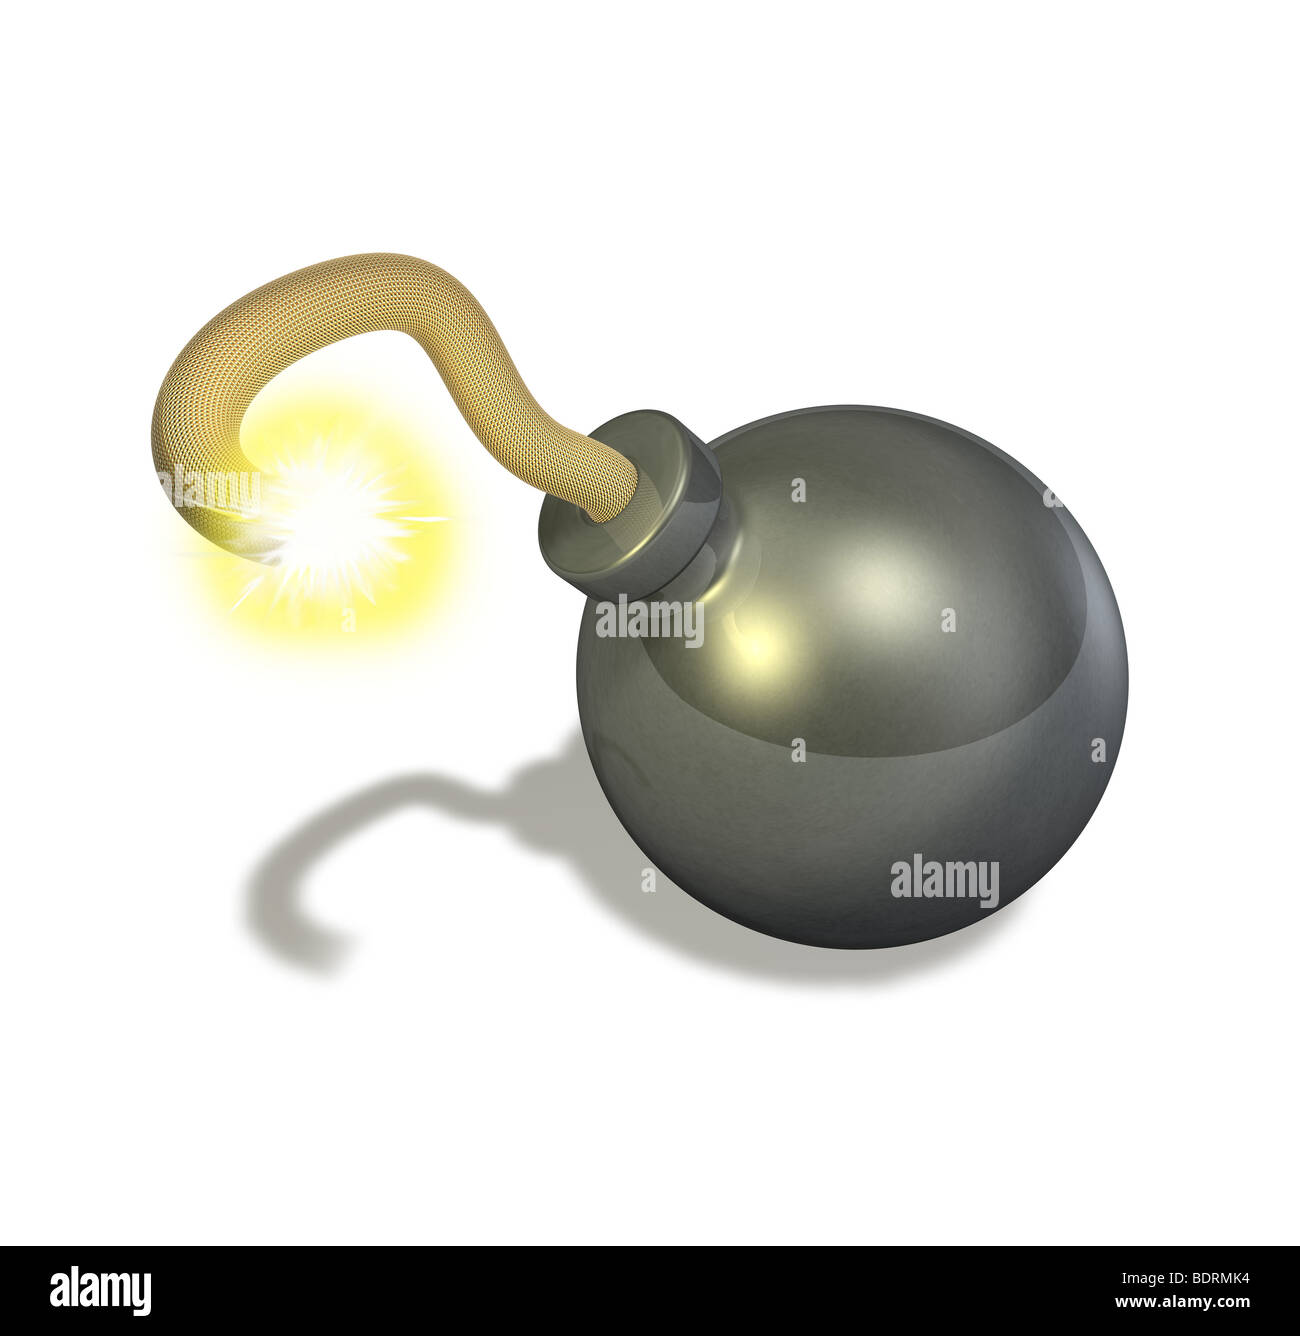 3d render illustration of a bomb with a lit fuse Stock Photo